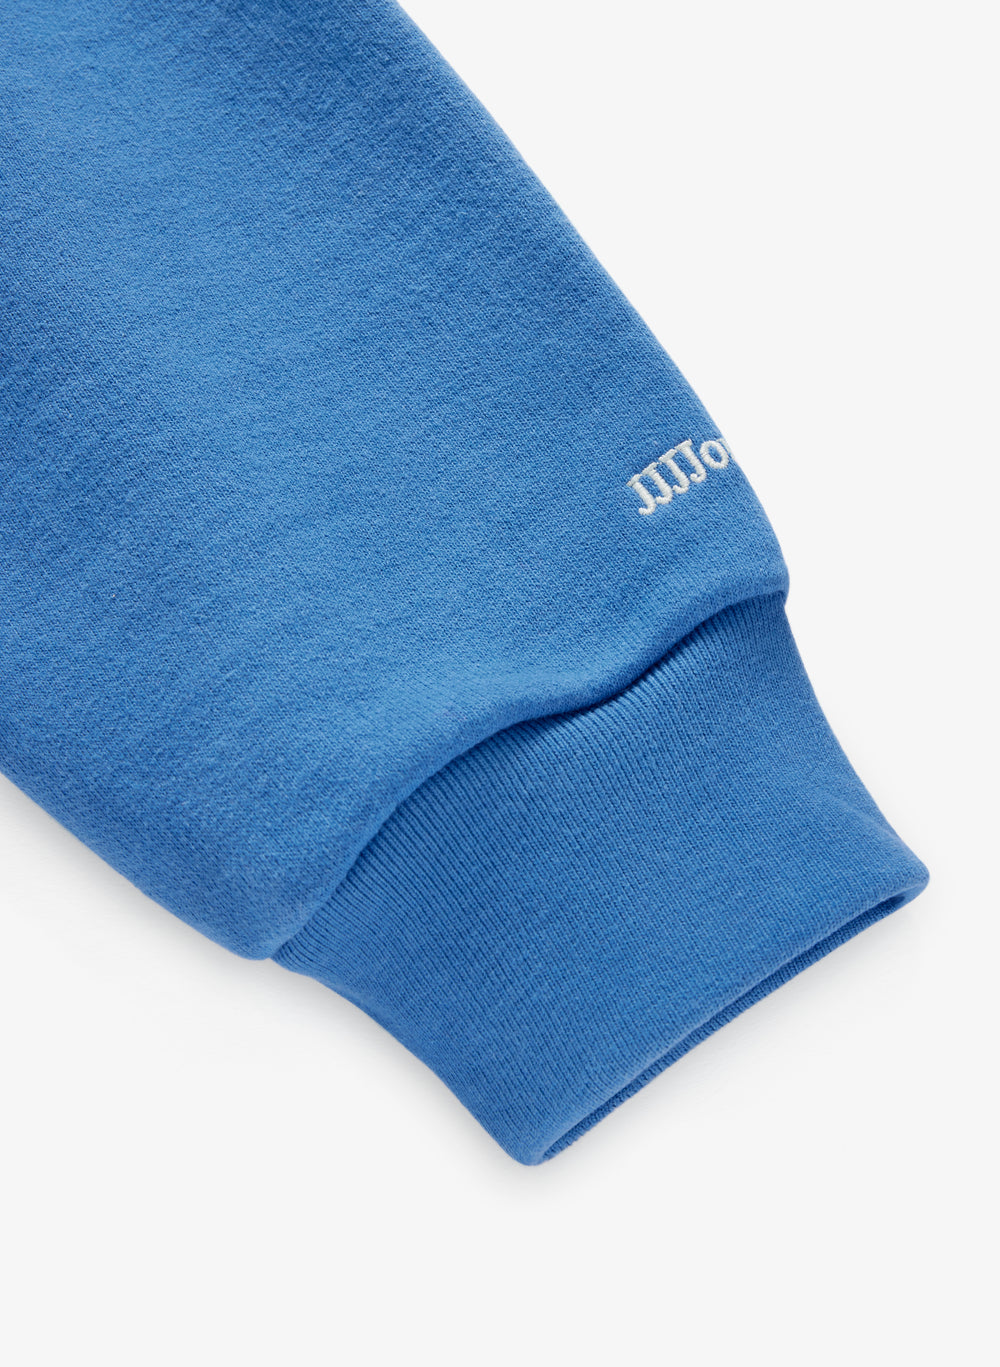 J2000 Hoodie - Blue French Terry